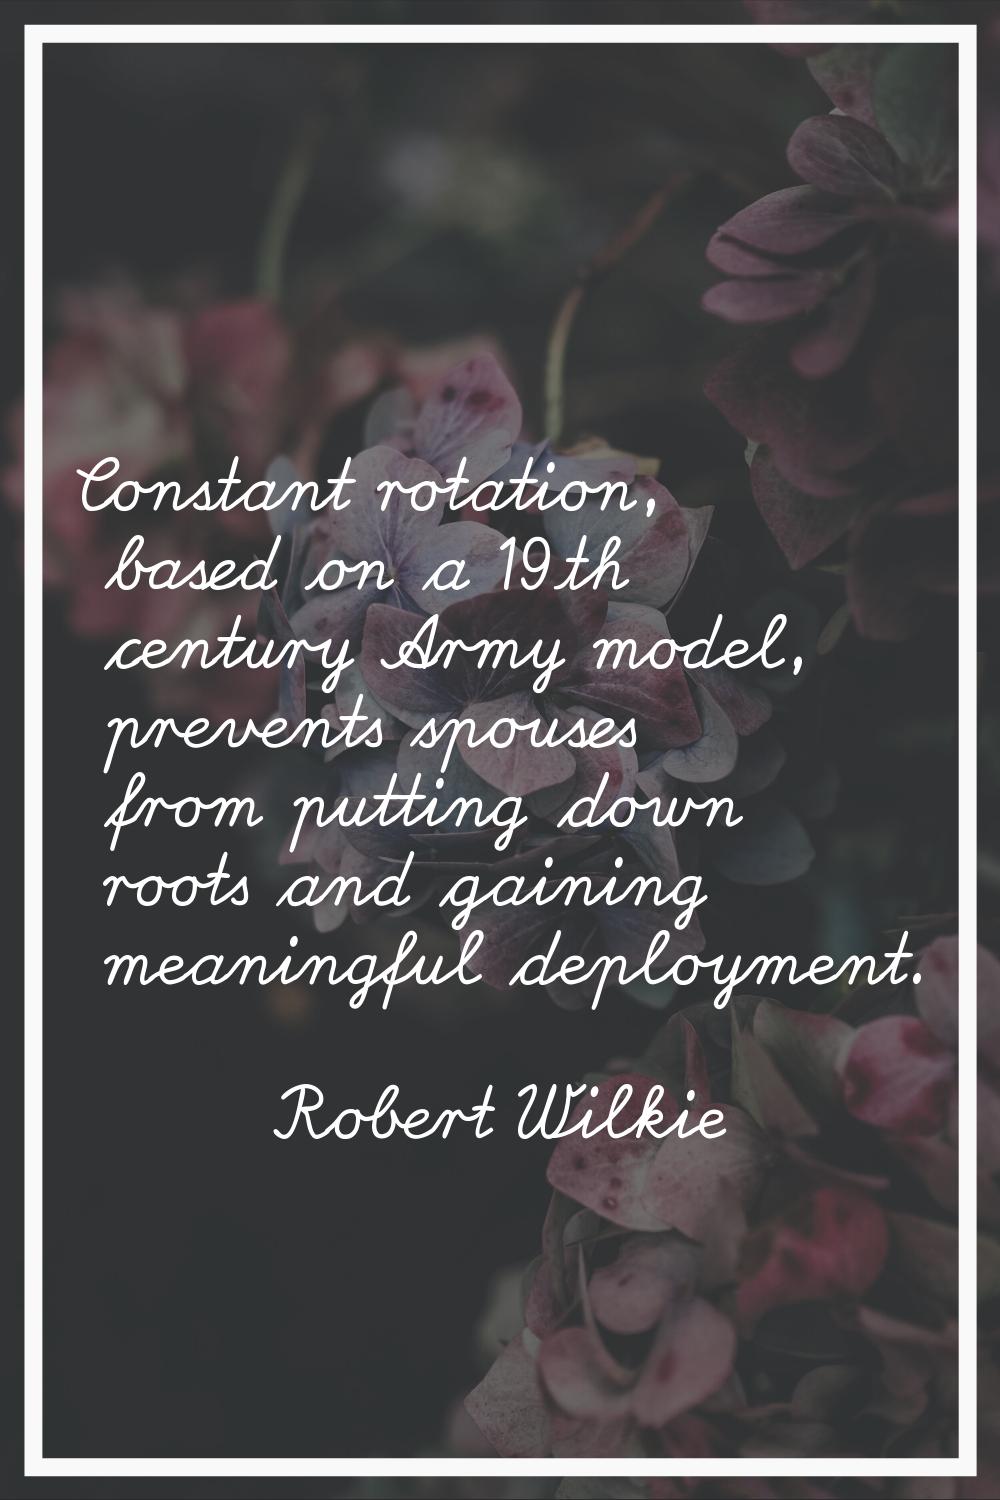 Constant rotation, based on a 19th century Army model, prevents spouses from putting down roots and